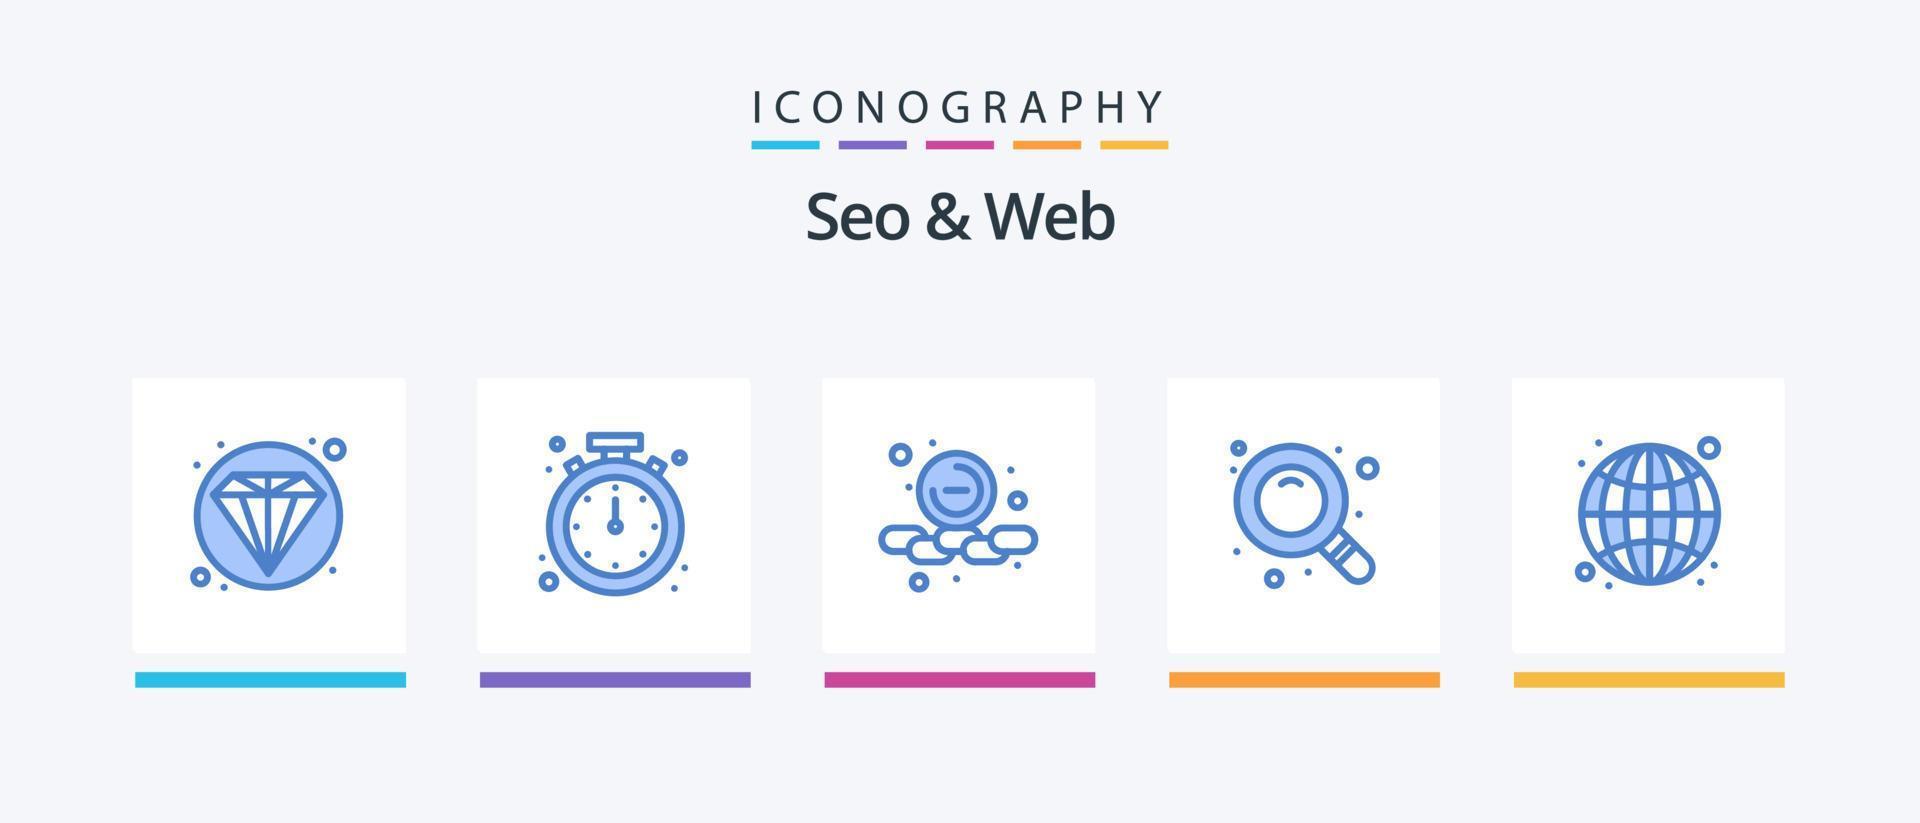 Seo and Web Blue 5 Icon Pack Including seo. globe. less. find. search. Creative Icons Design vector